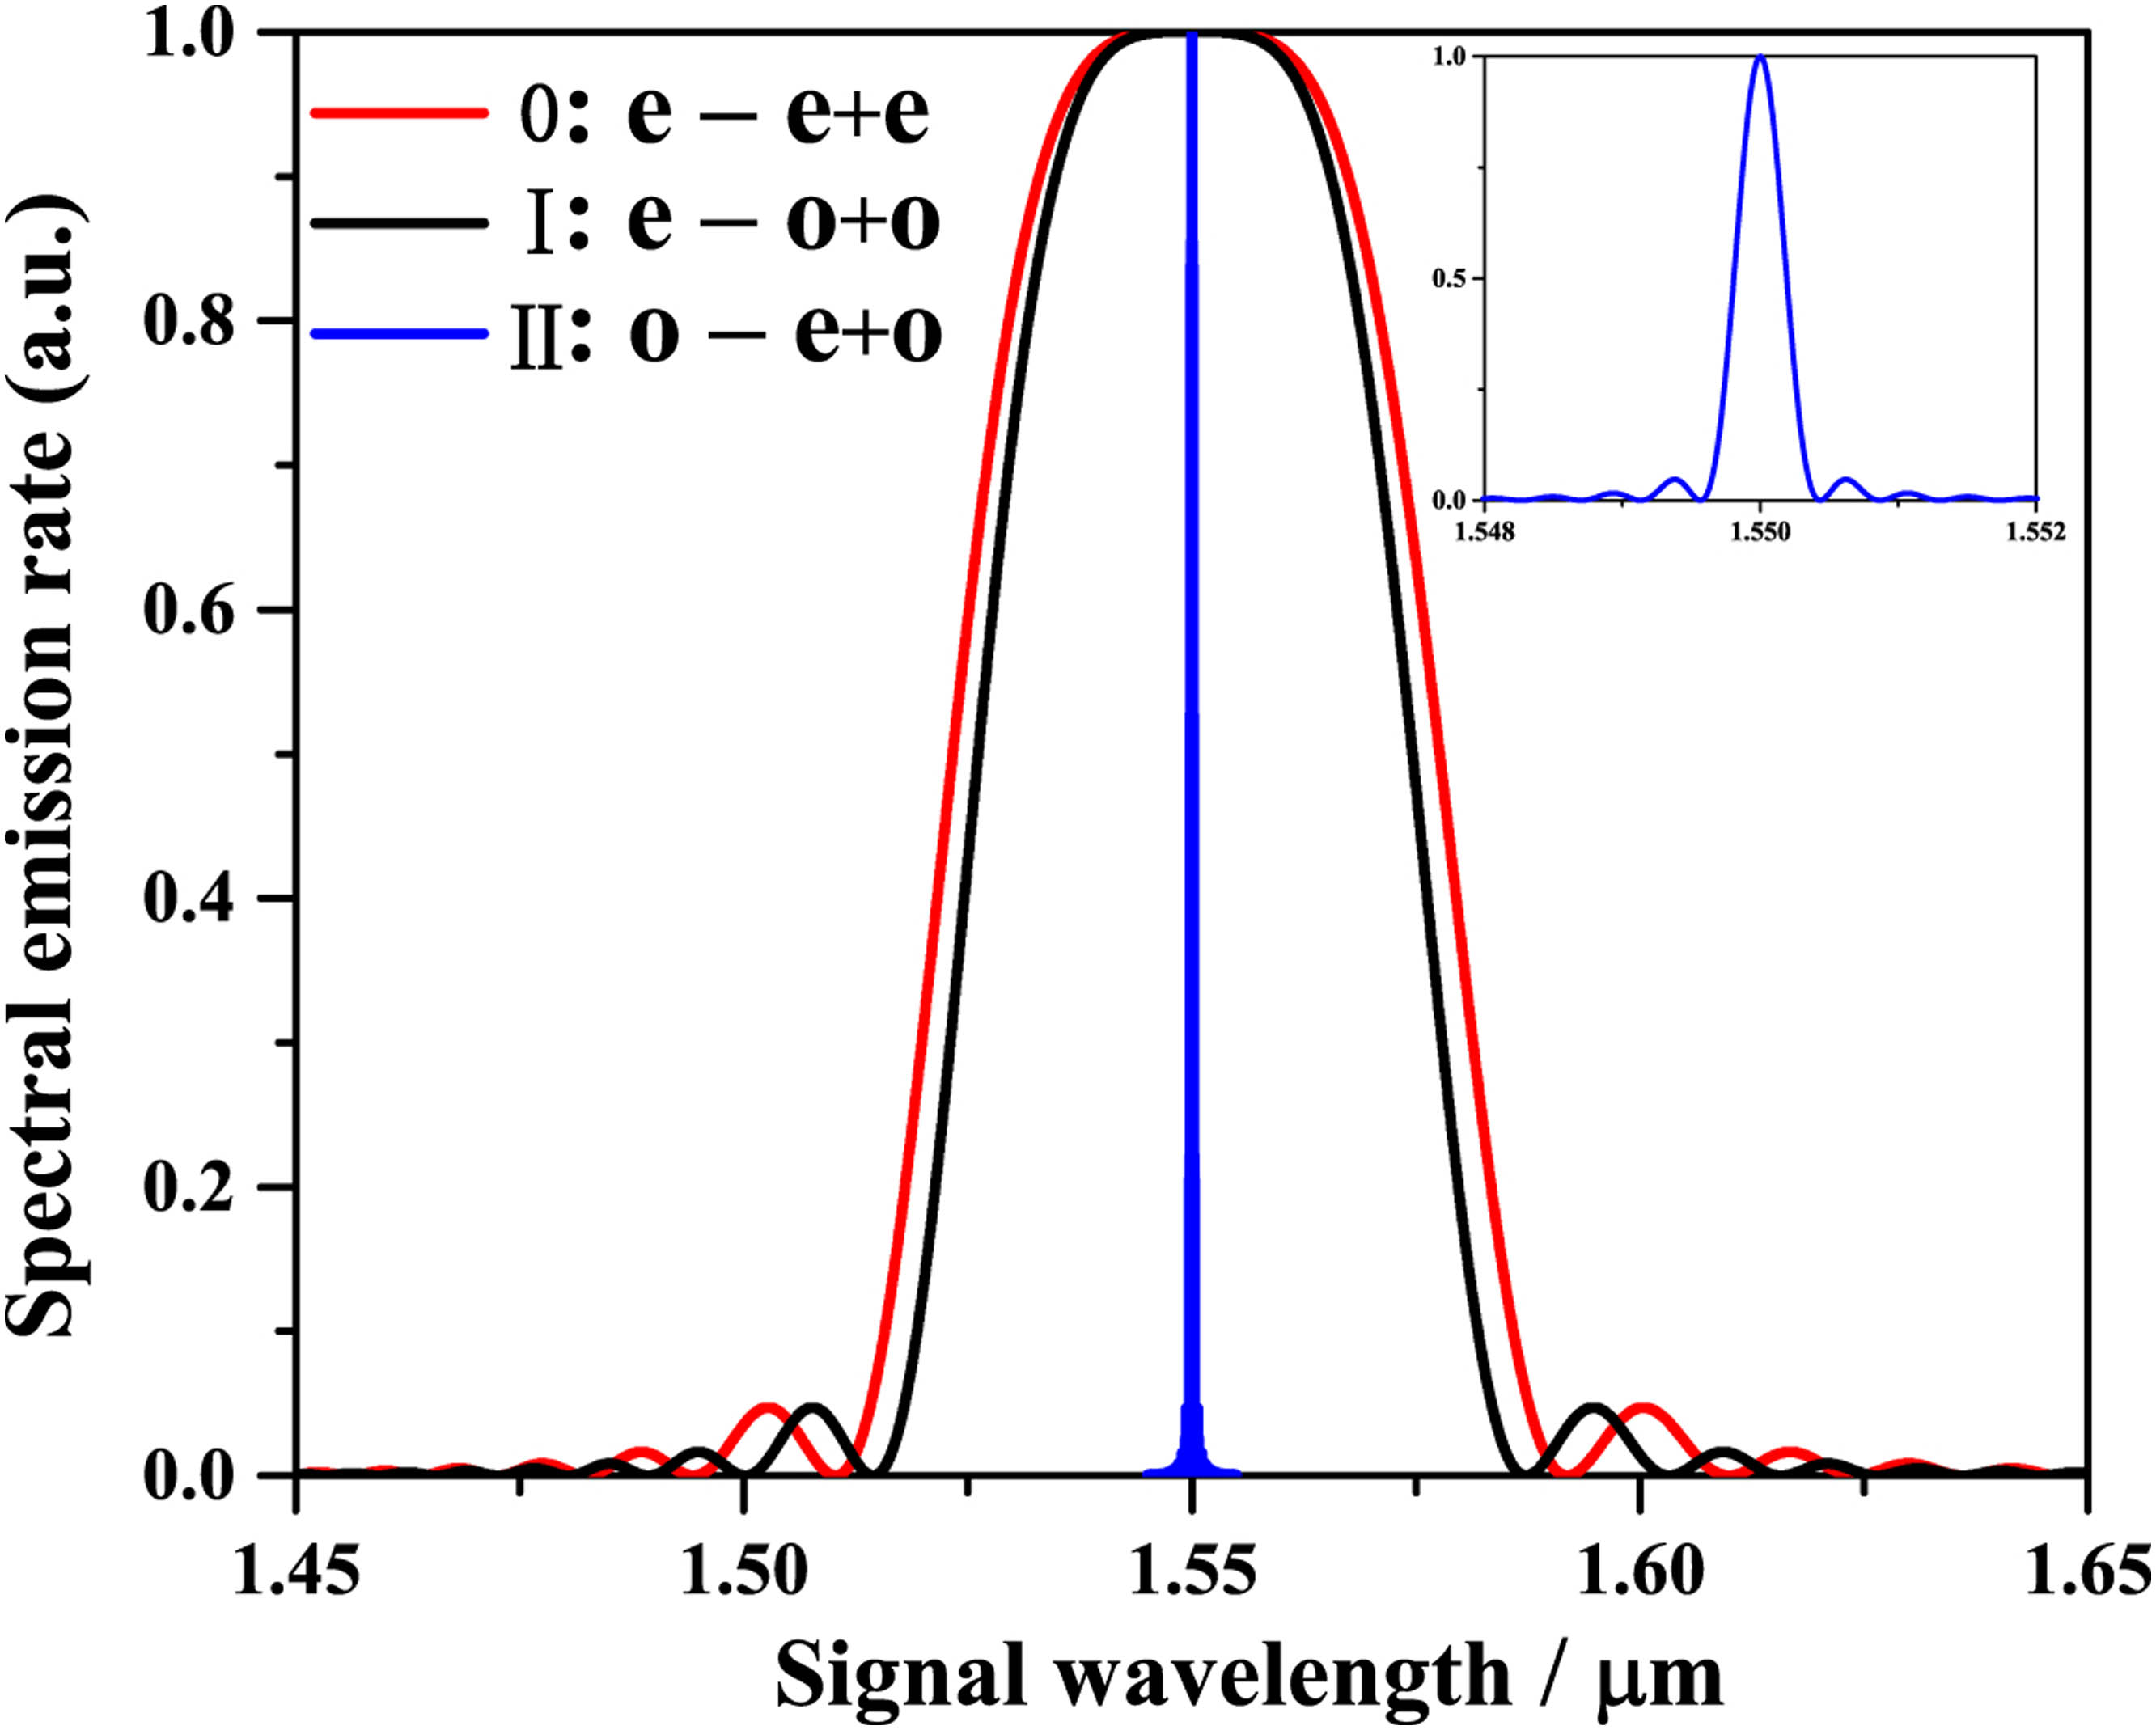 Spectral emission rate of type I (black solid) and type II (red solid) QPM SPDC in a 2 cm-long 5% MgO:PPLN waveguide at the temperature of 20°C versus the signal wavelength. Curves of type 0, type I, and II have an FWHM of 54.3, 48.5, and 0.4 nm, respectively.